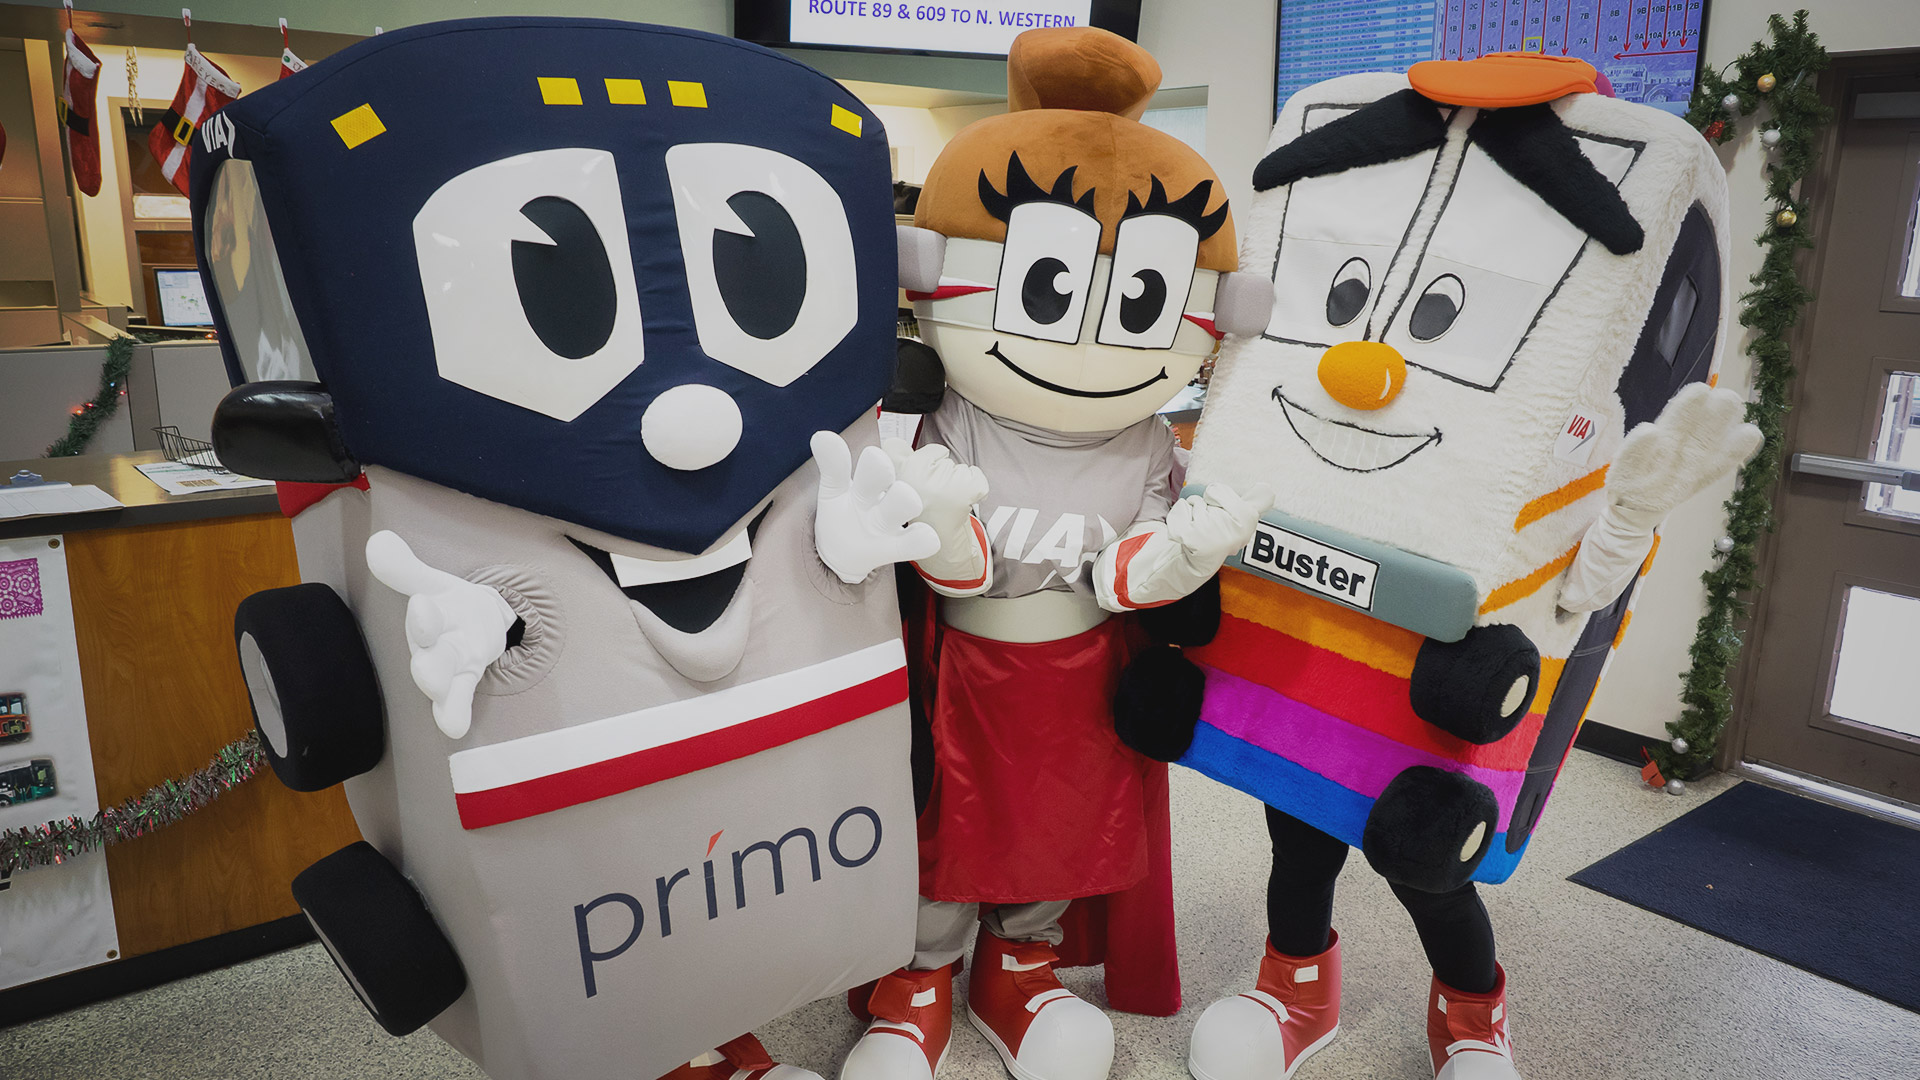 VIA Metropolitan Mascot Family, Prímo, Safety Sophie, and Buster the Bus (left to right). Source: VIA